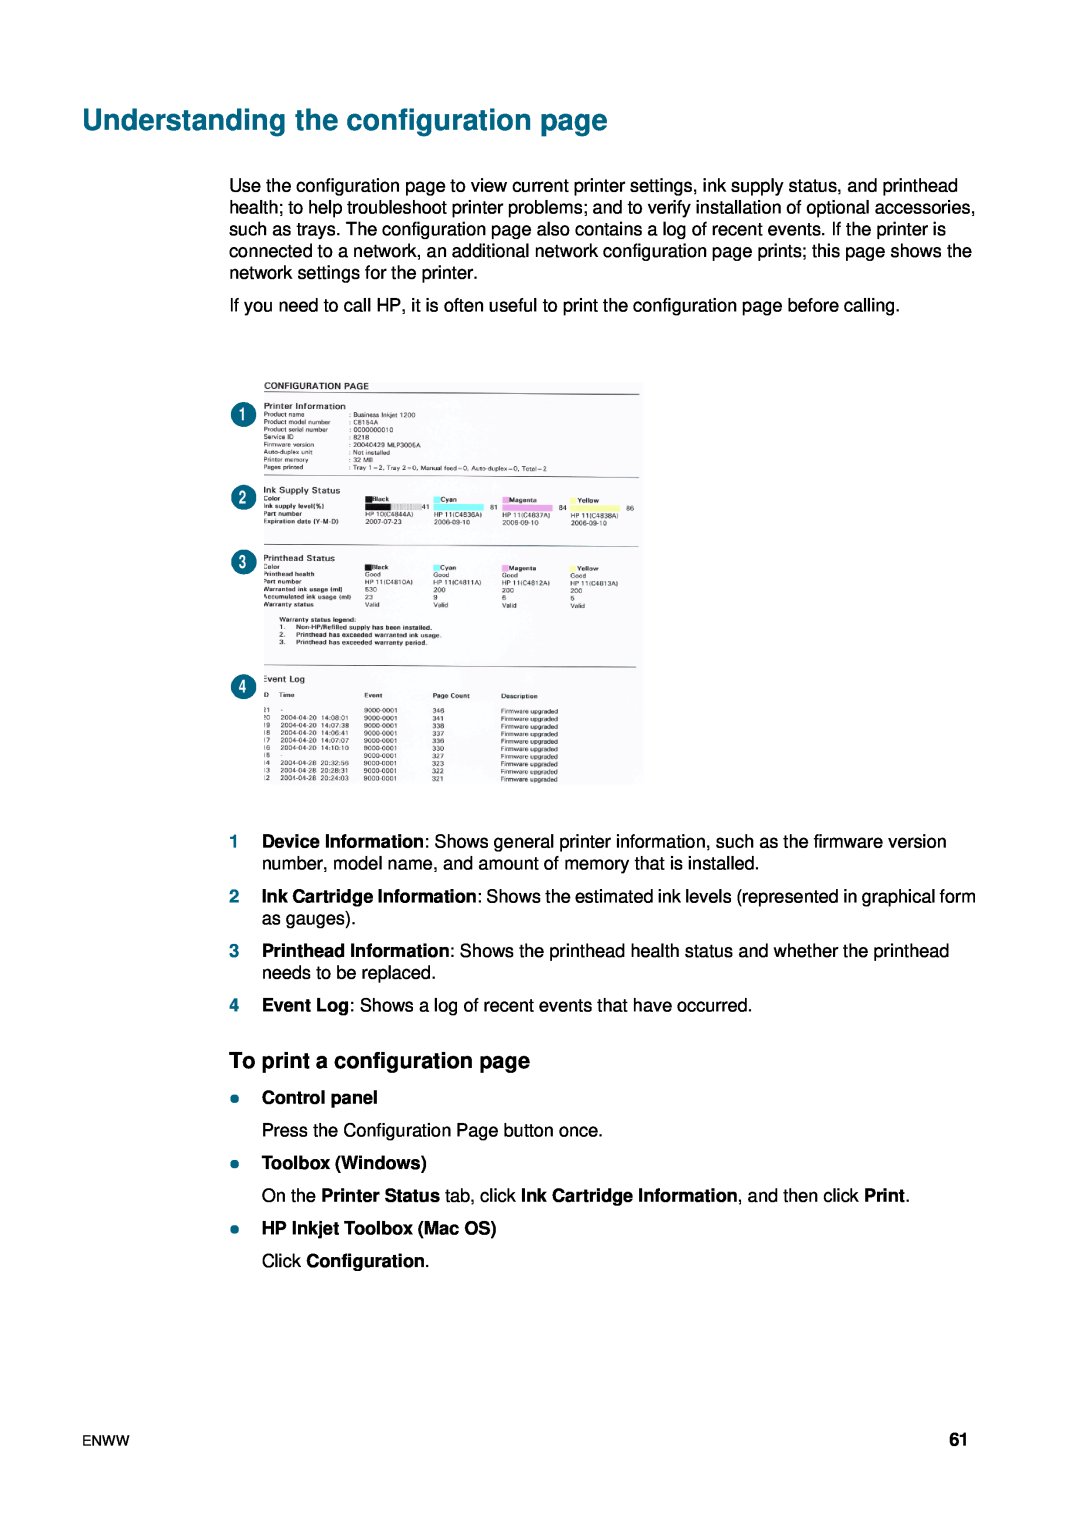 HP 1200 manual Understanding the configuration page, To print a configuration page, z Control panel, z Toolbox Windows 